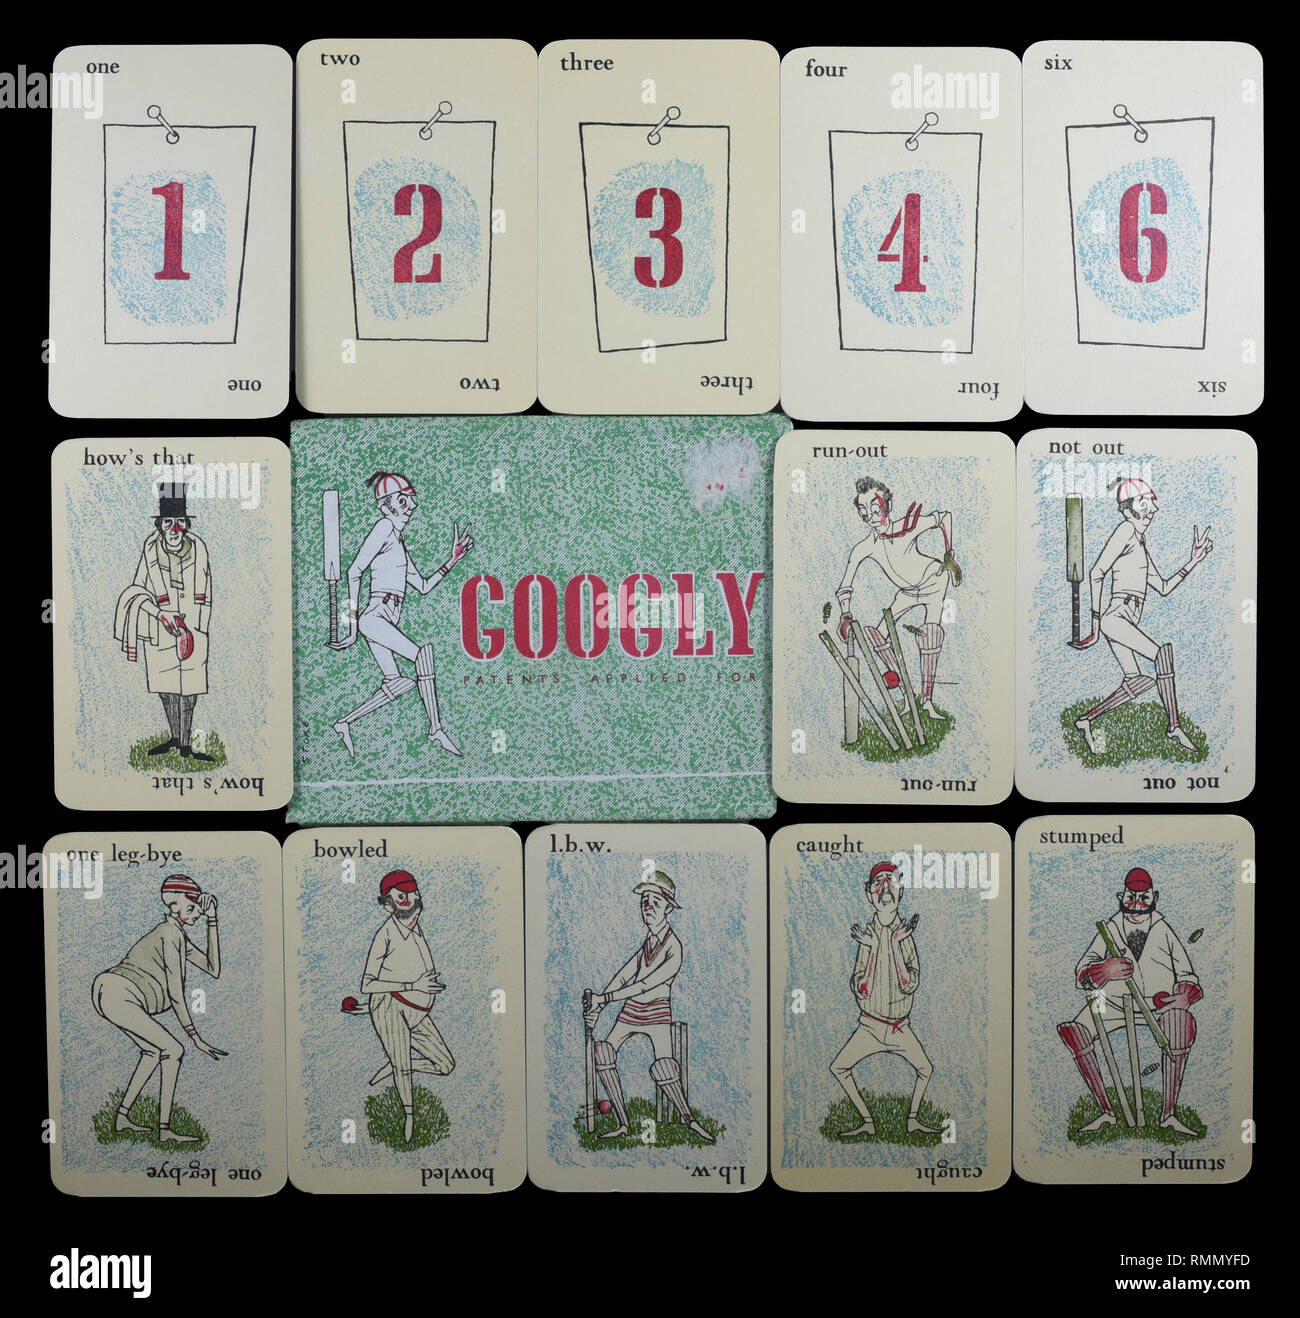 Full set of vintage cricket card game of GOOGLY by Smith & Hallam Ltd of London. Isolated on black background with cards in a square block. Stock Photo